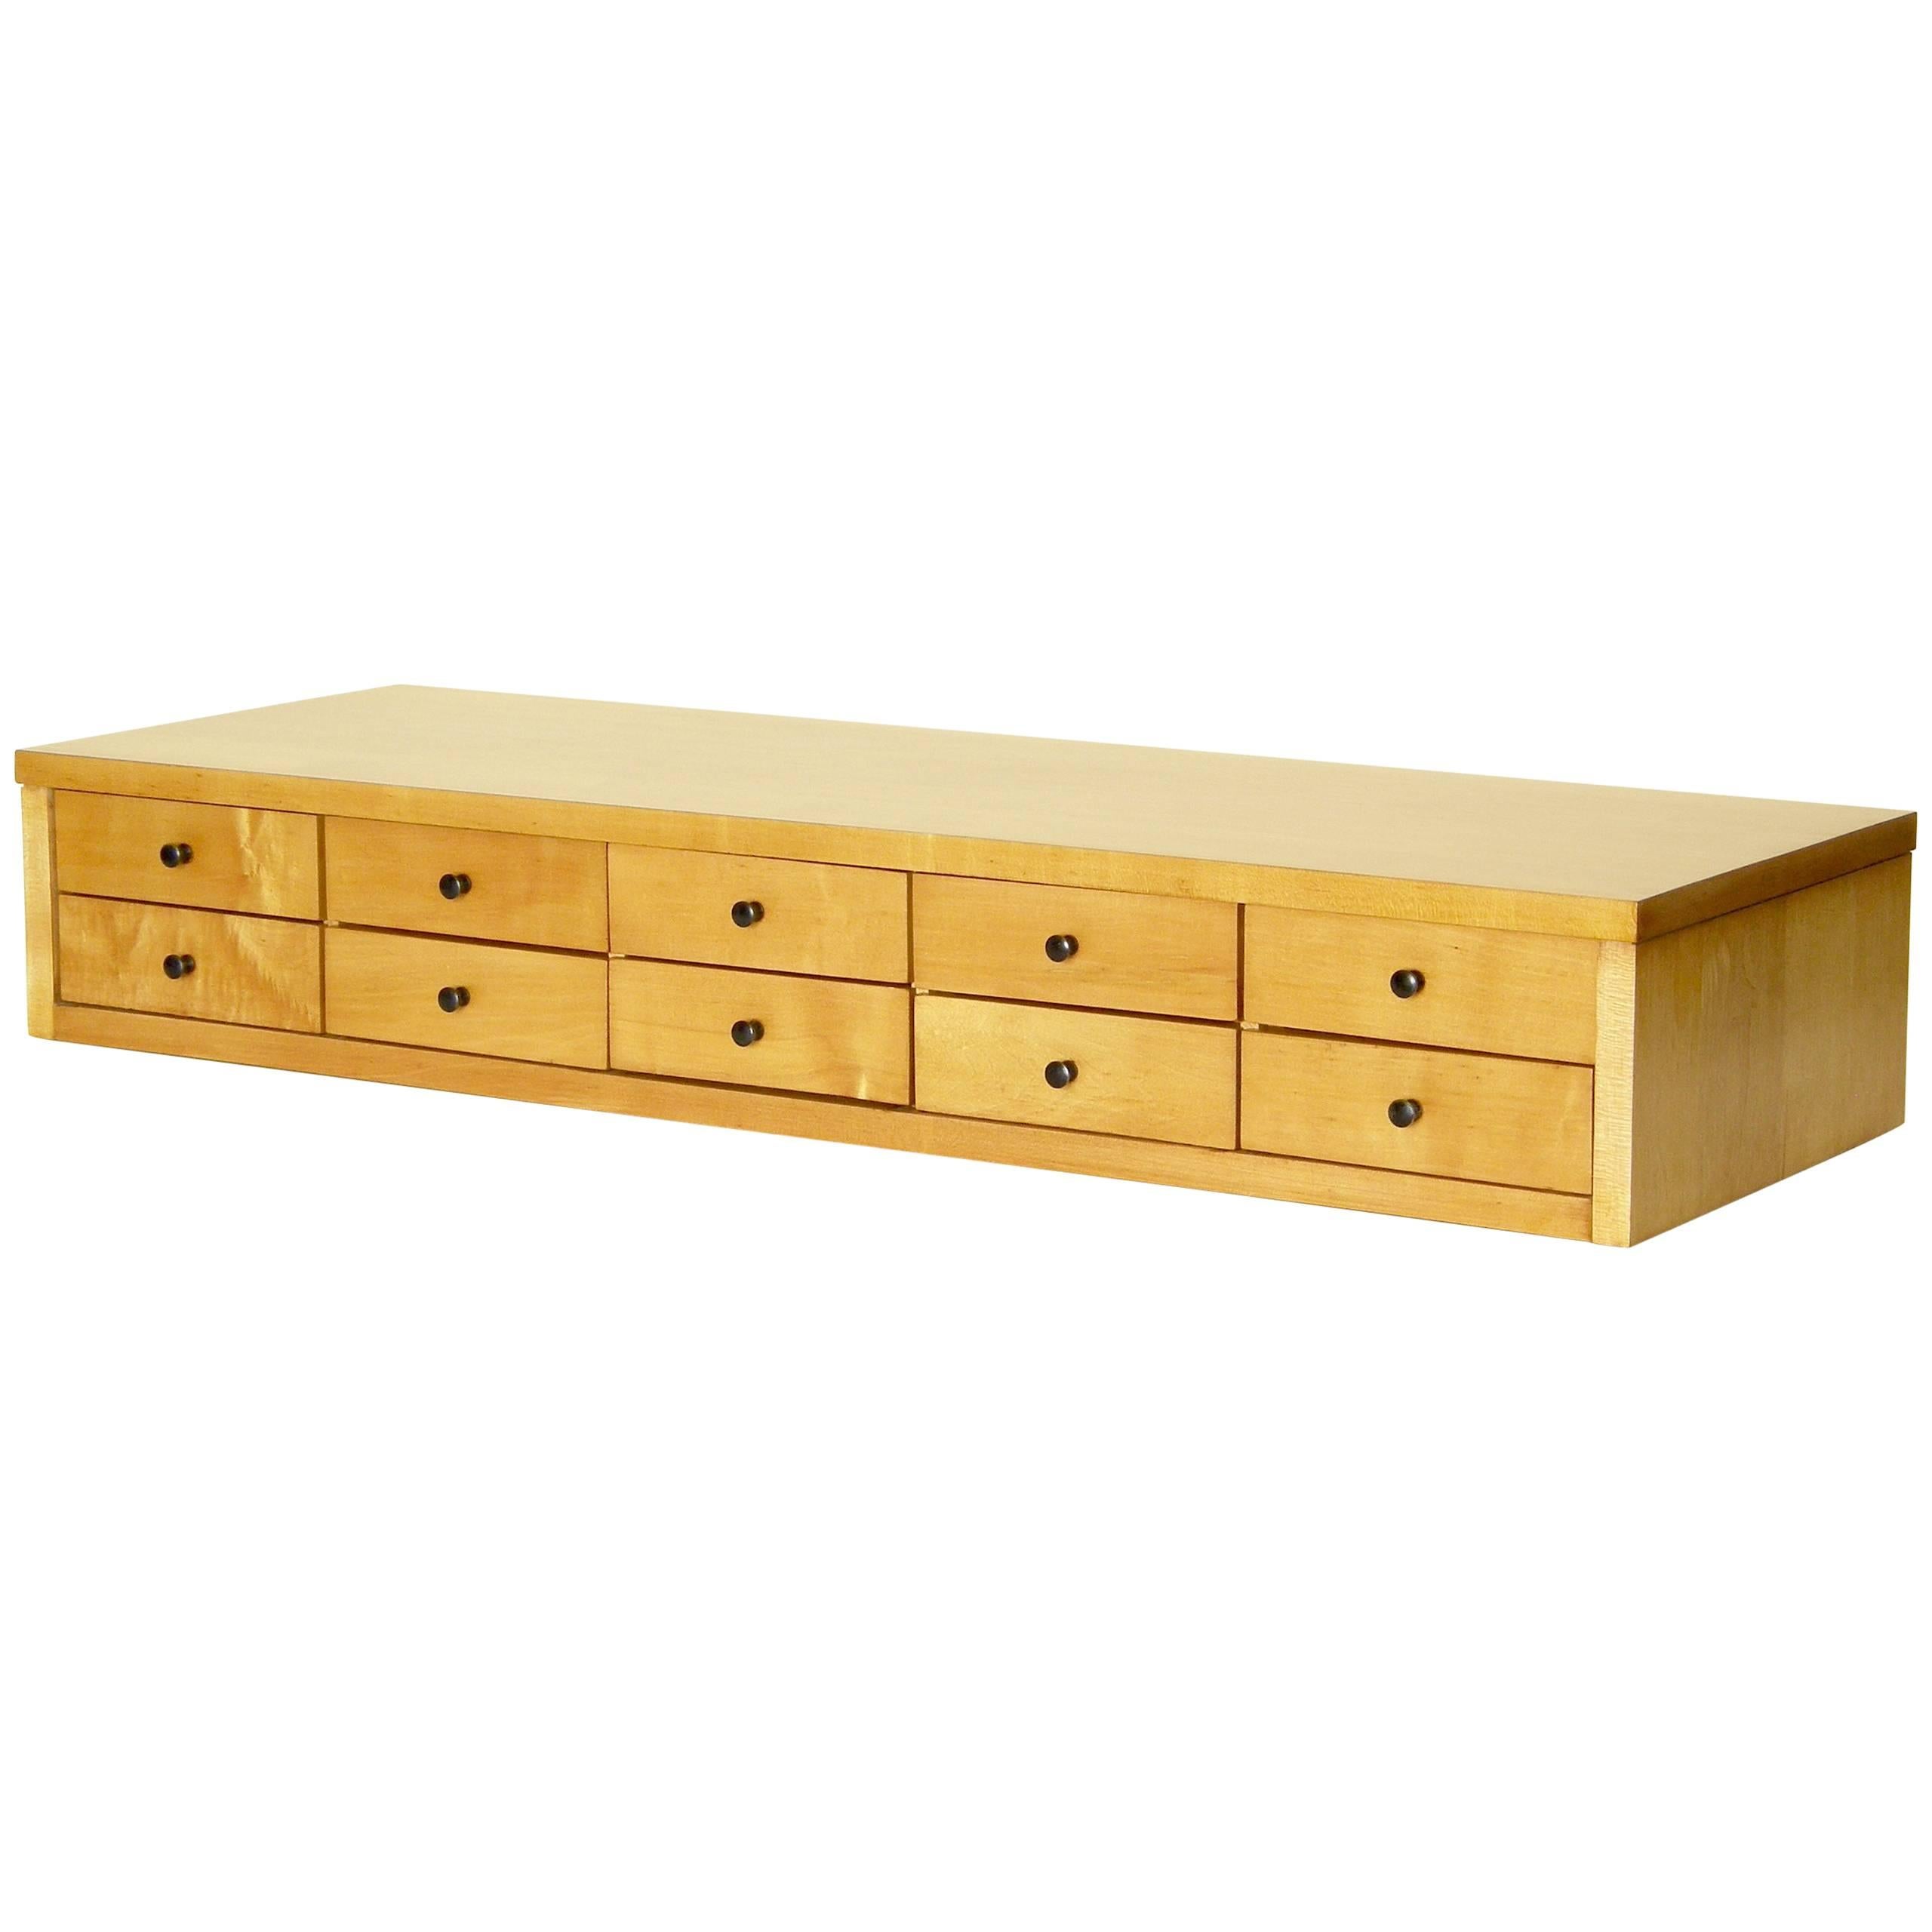 Paul McCobb Planner Group Jewelry Chest for Winchendon Furniture